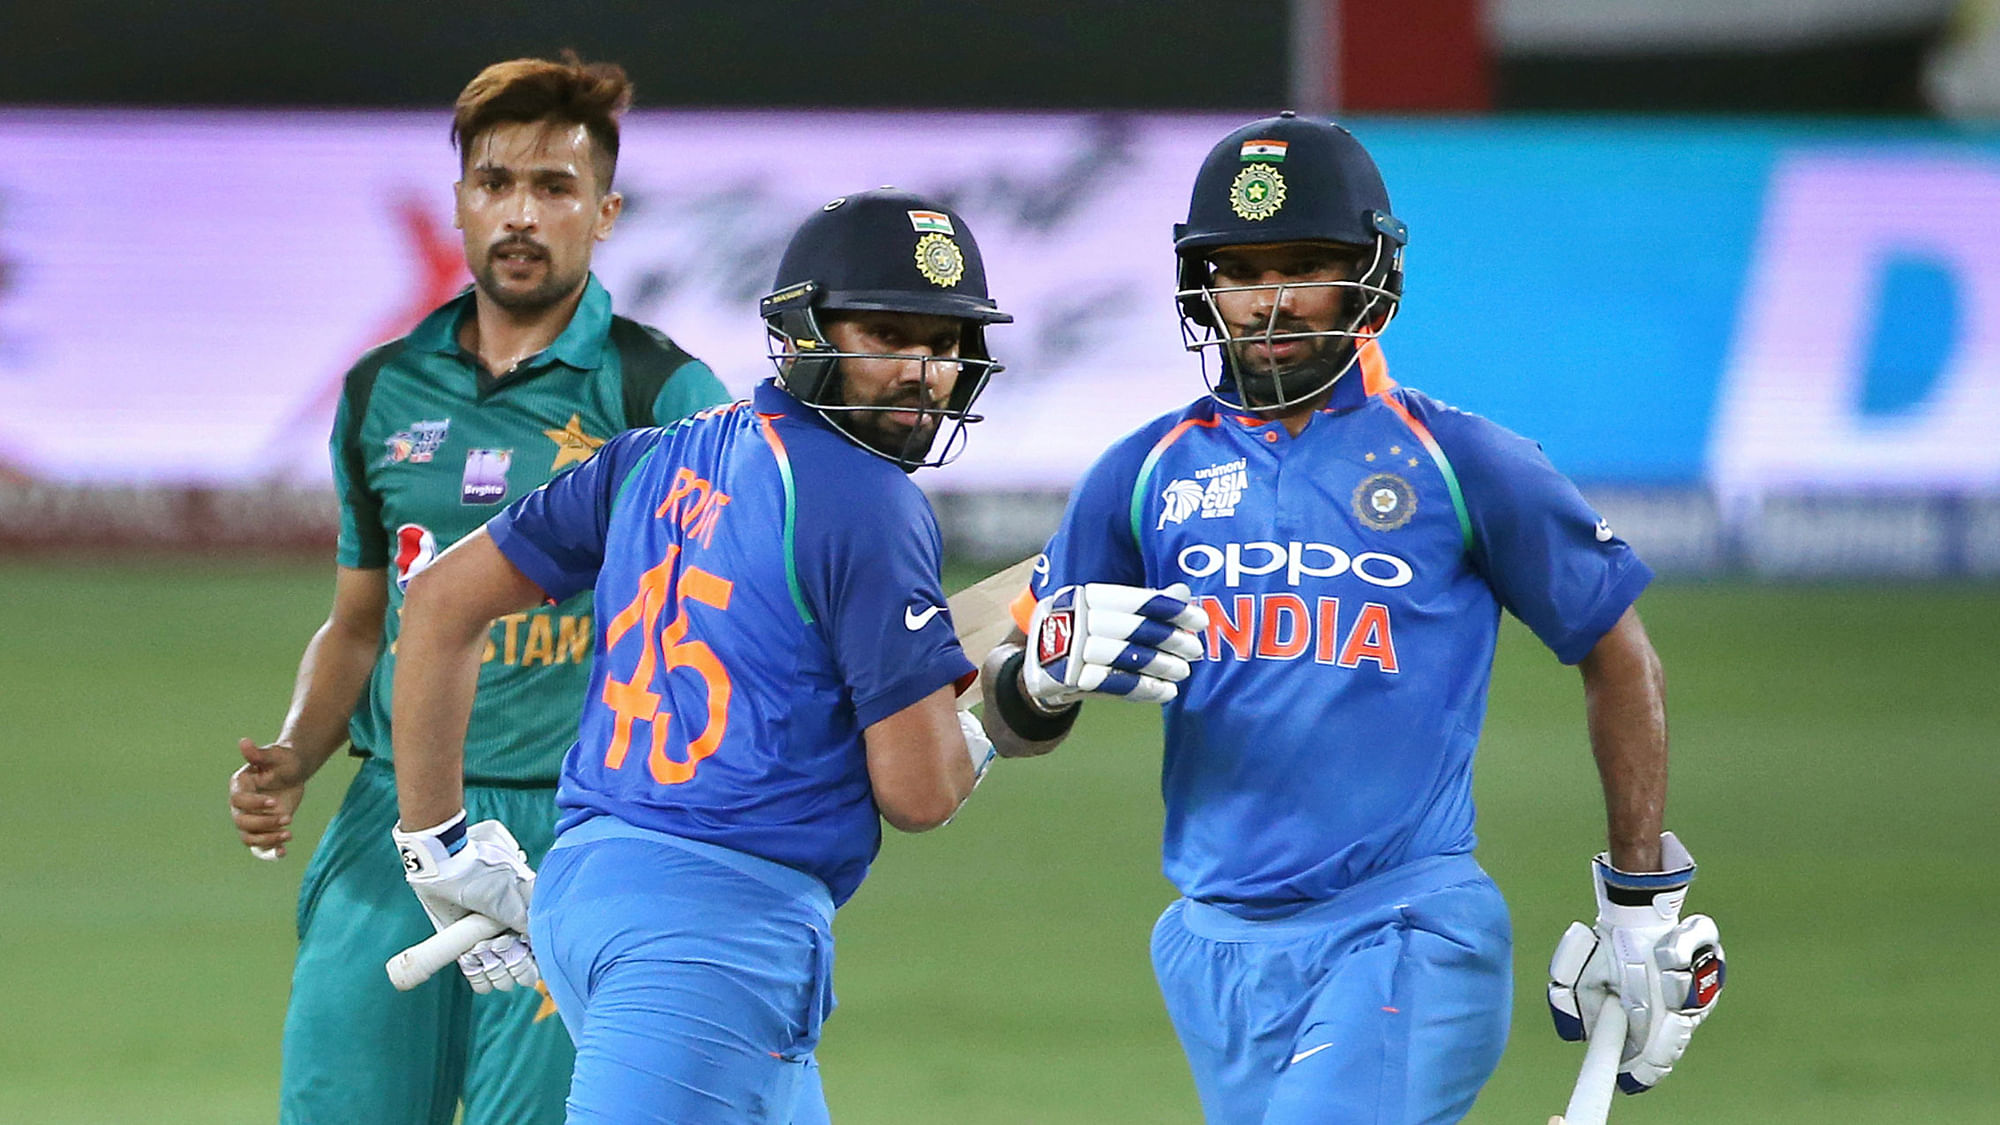 Rohit Sharma and Shikhar Dhawan scored centuries in India’s Super Four match against Pakistan.